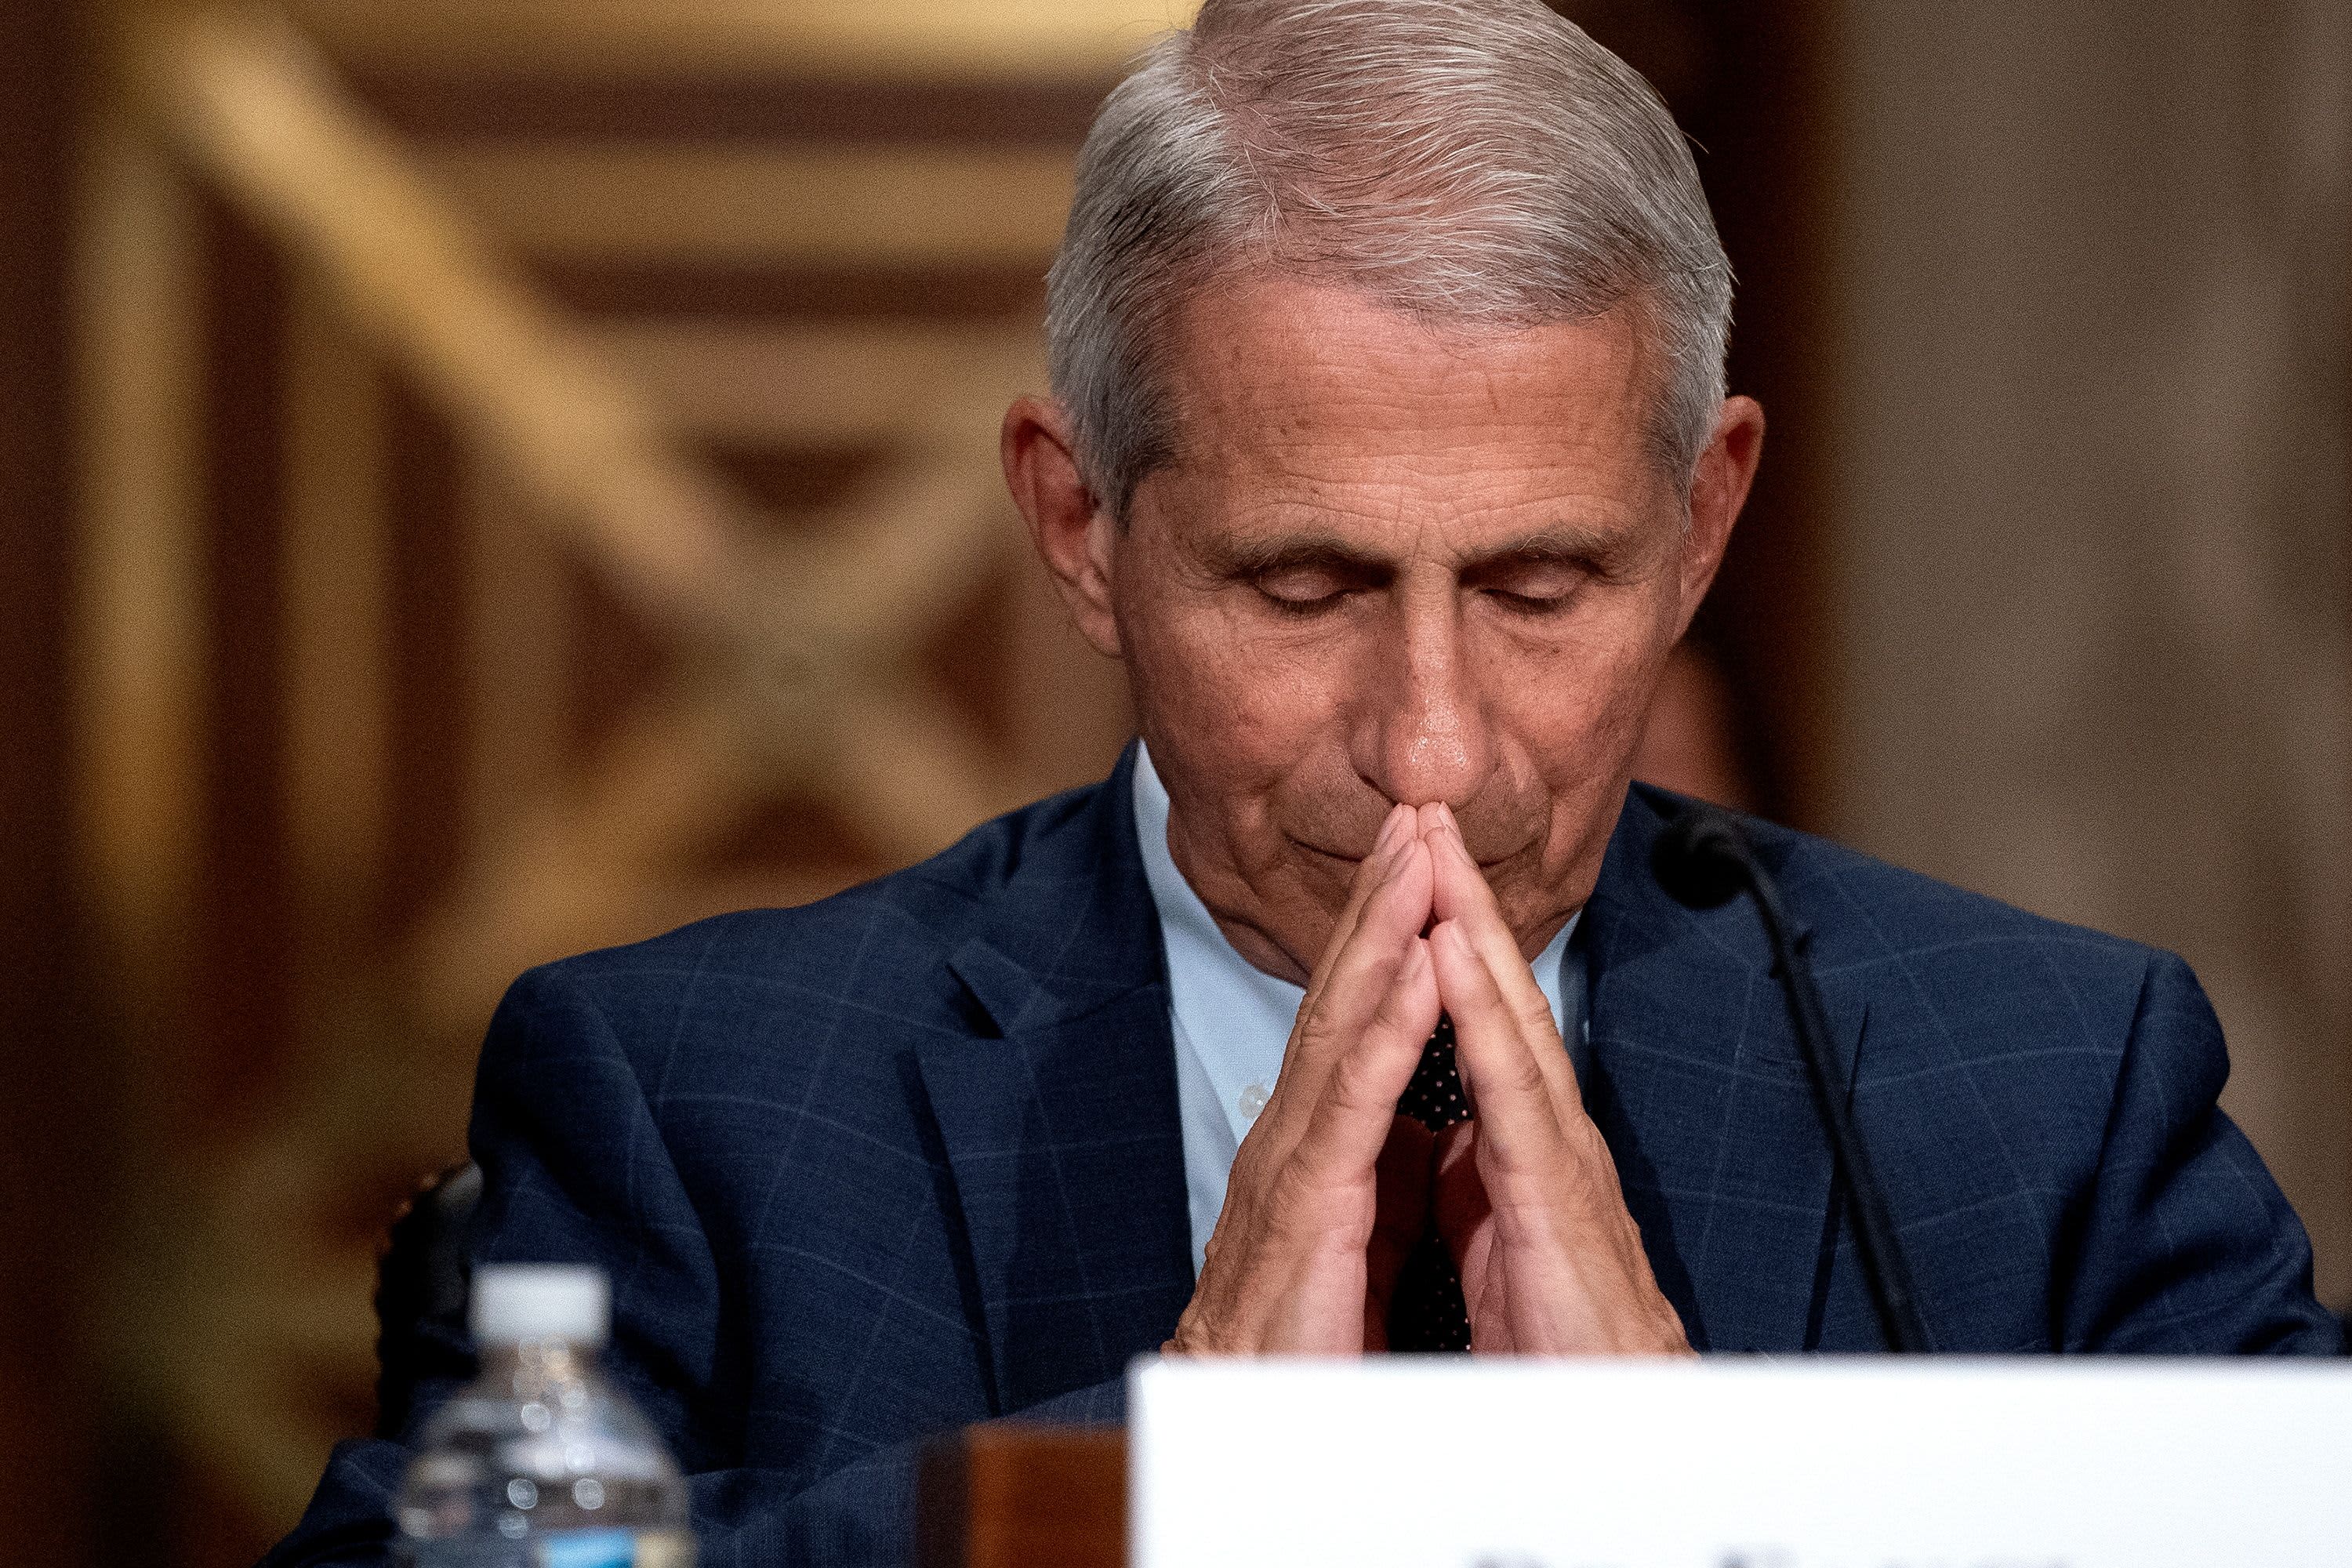 Fauci warns more severe Covid variant could emerge as U.S. cases near 100,000